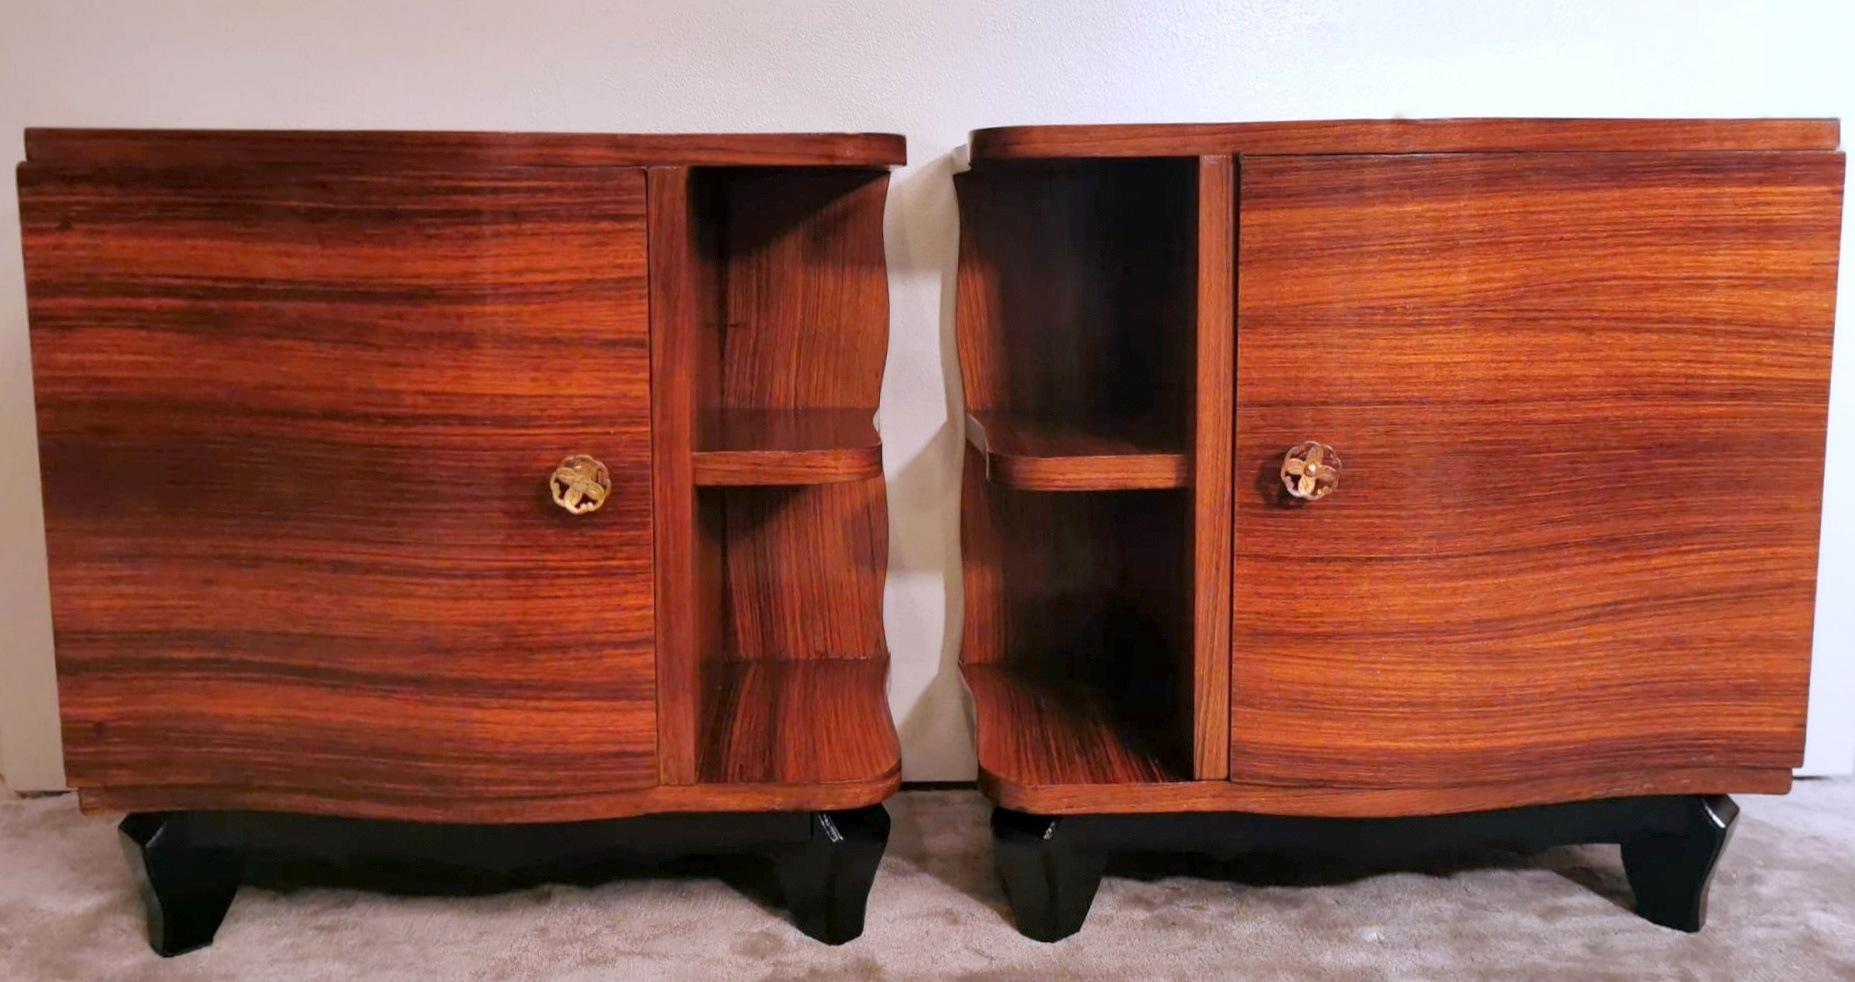 We kindly suggest you read the whole description, because with it we try to give you detailed technical and historical information to guarantee the authenticity of our objects.
Peculiar and interesting pair of Italian wooden bedside tables; the